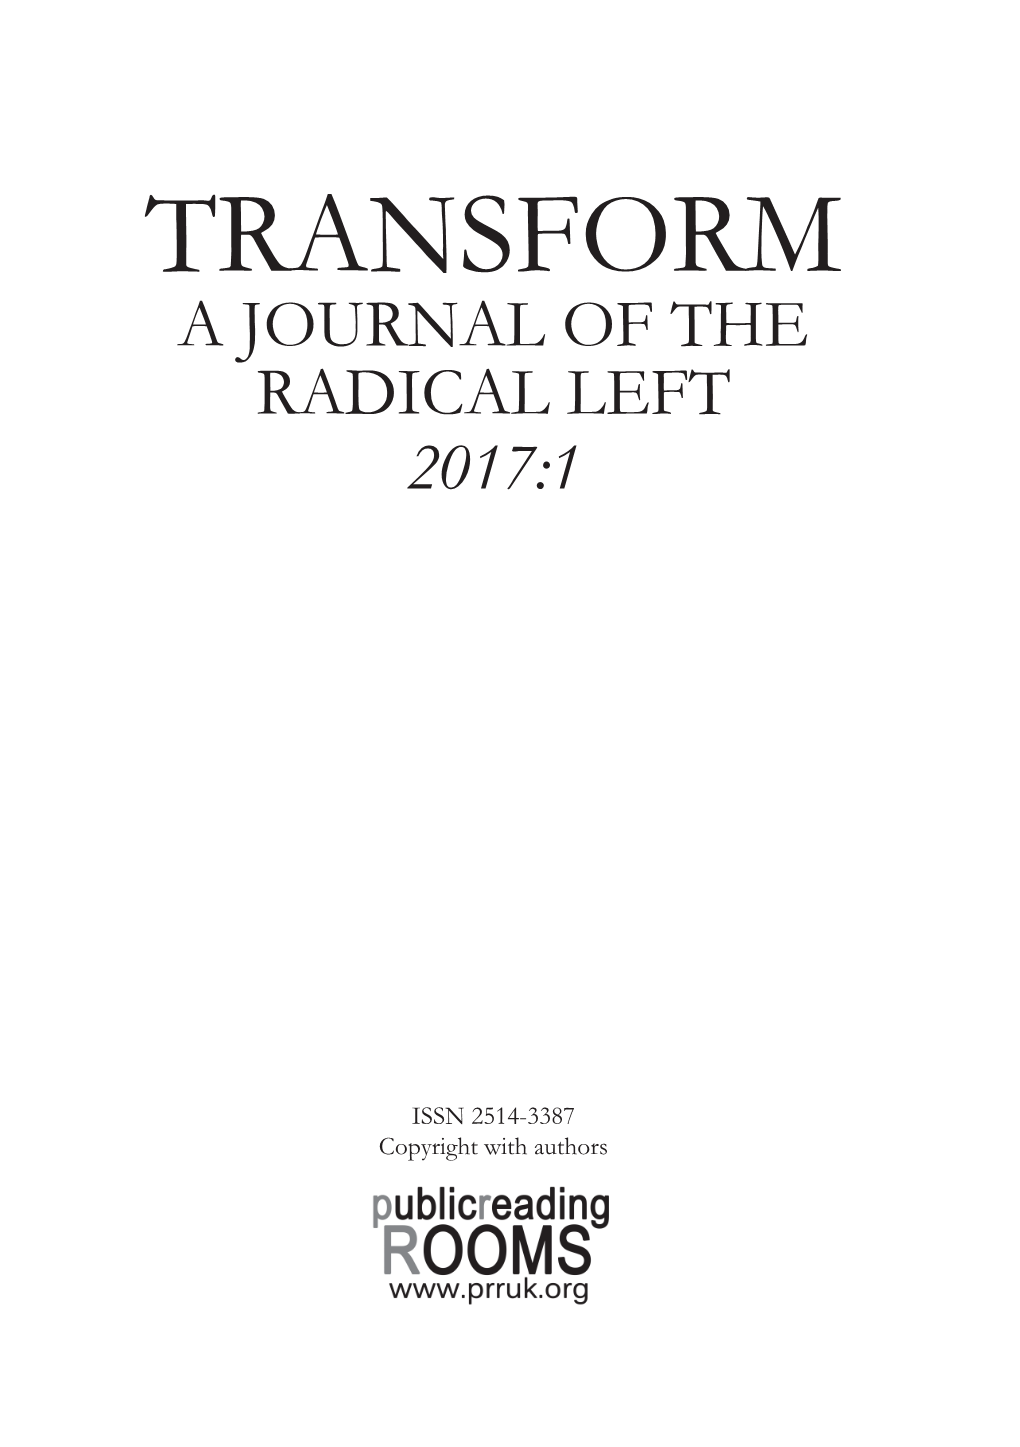 Transform a Journal of the Radical Left 2017:1